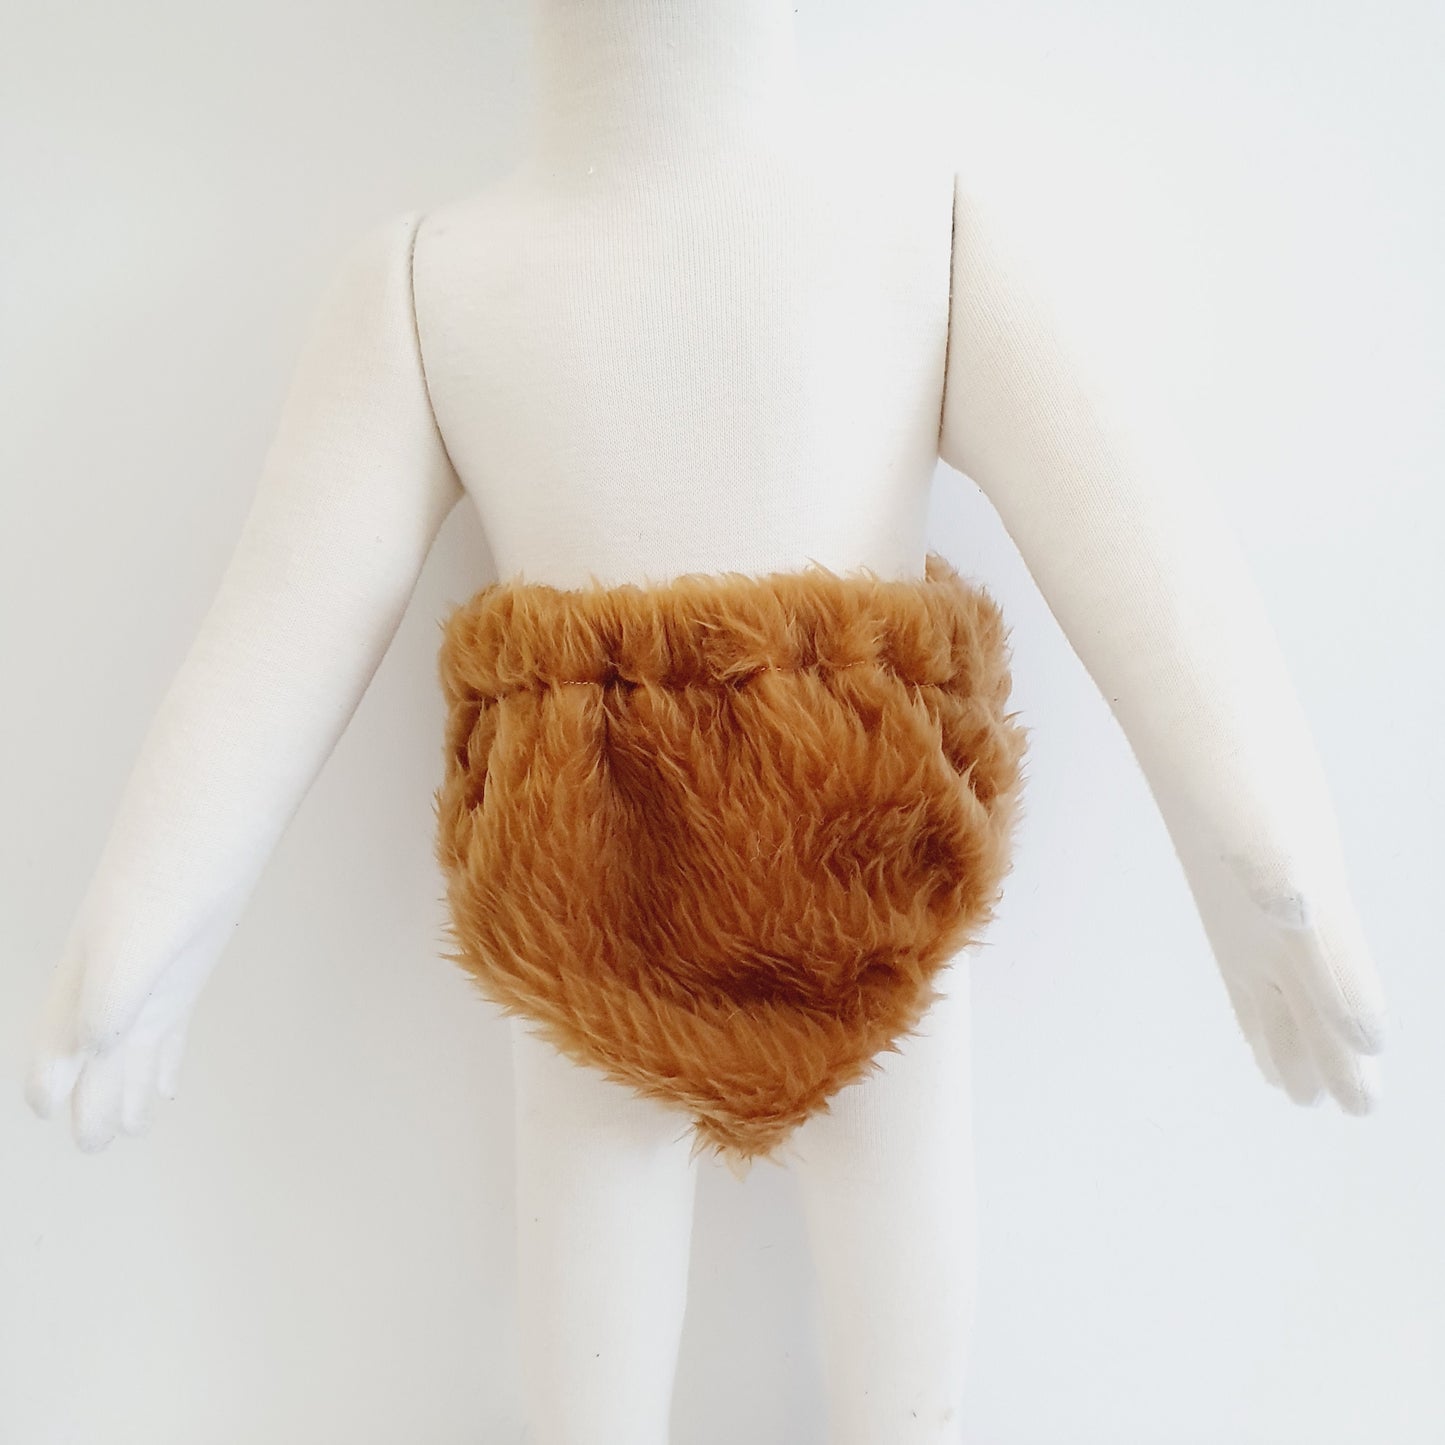 FAUX FUR - Fake Animal Hair LION - Baby Nappy Cover, Size 1 (12-24 months)